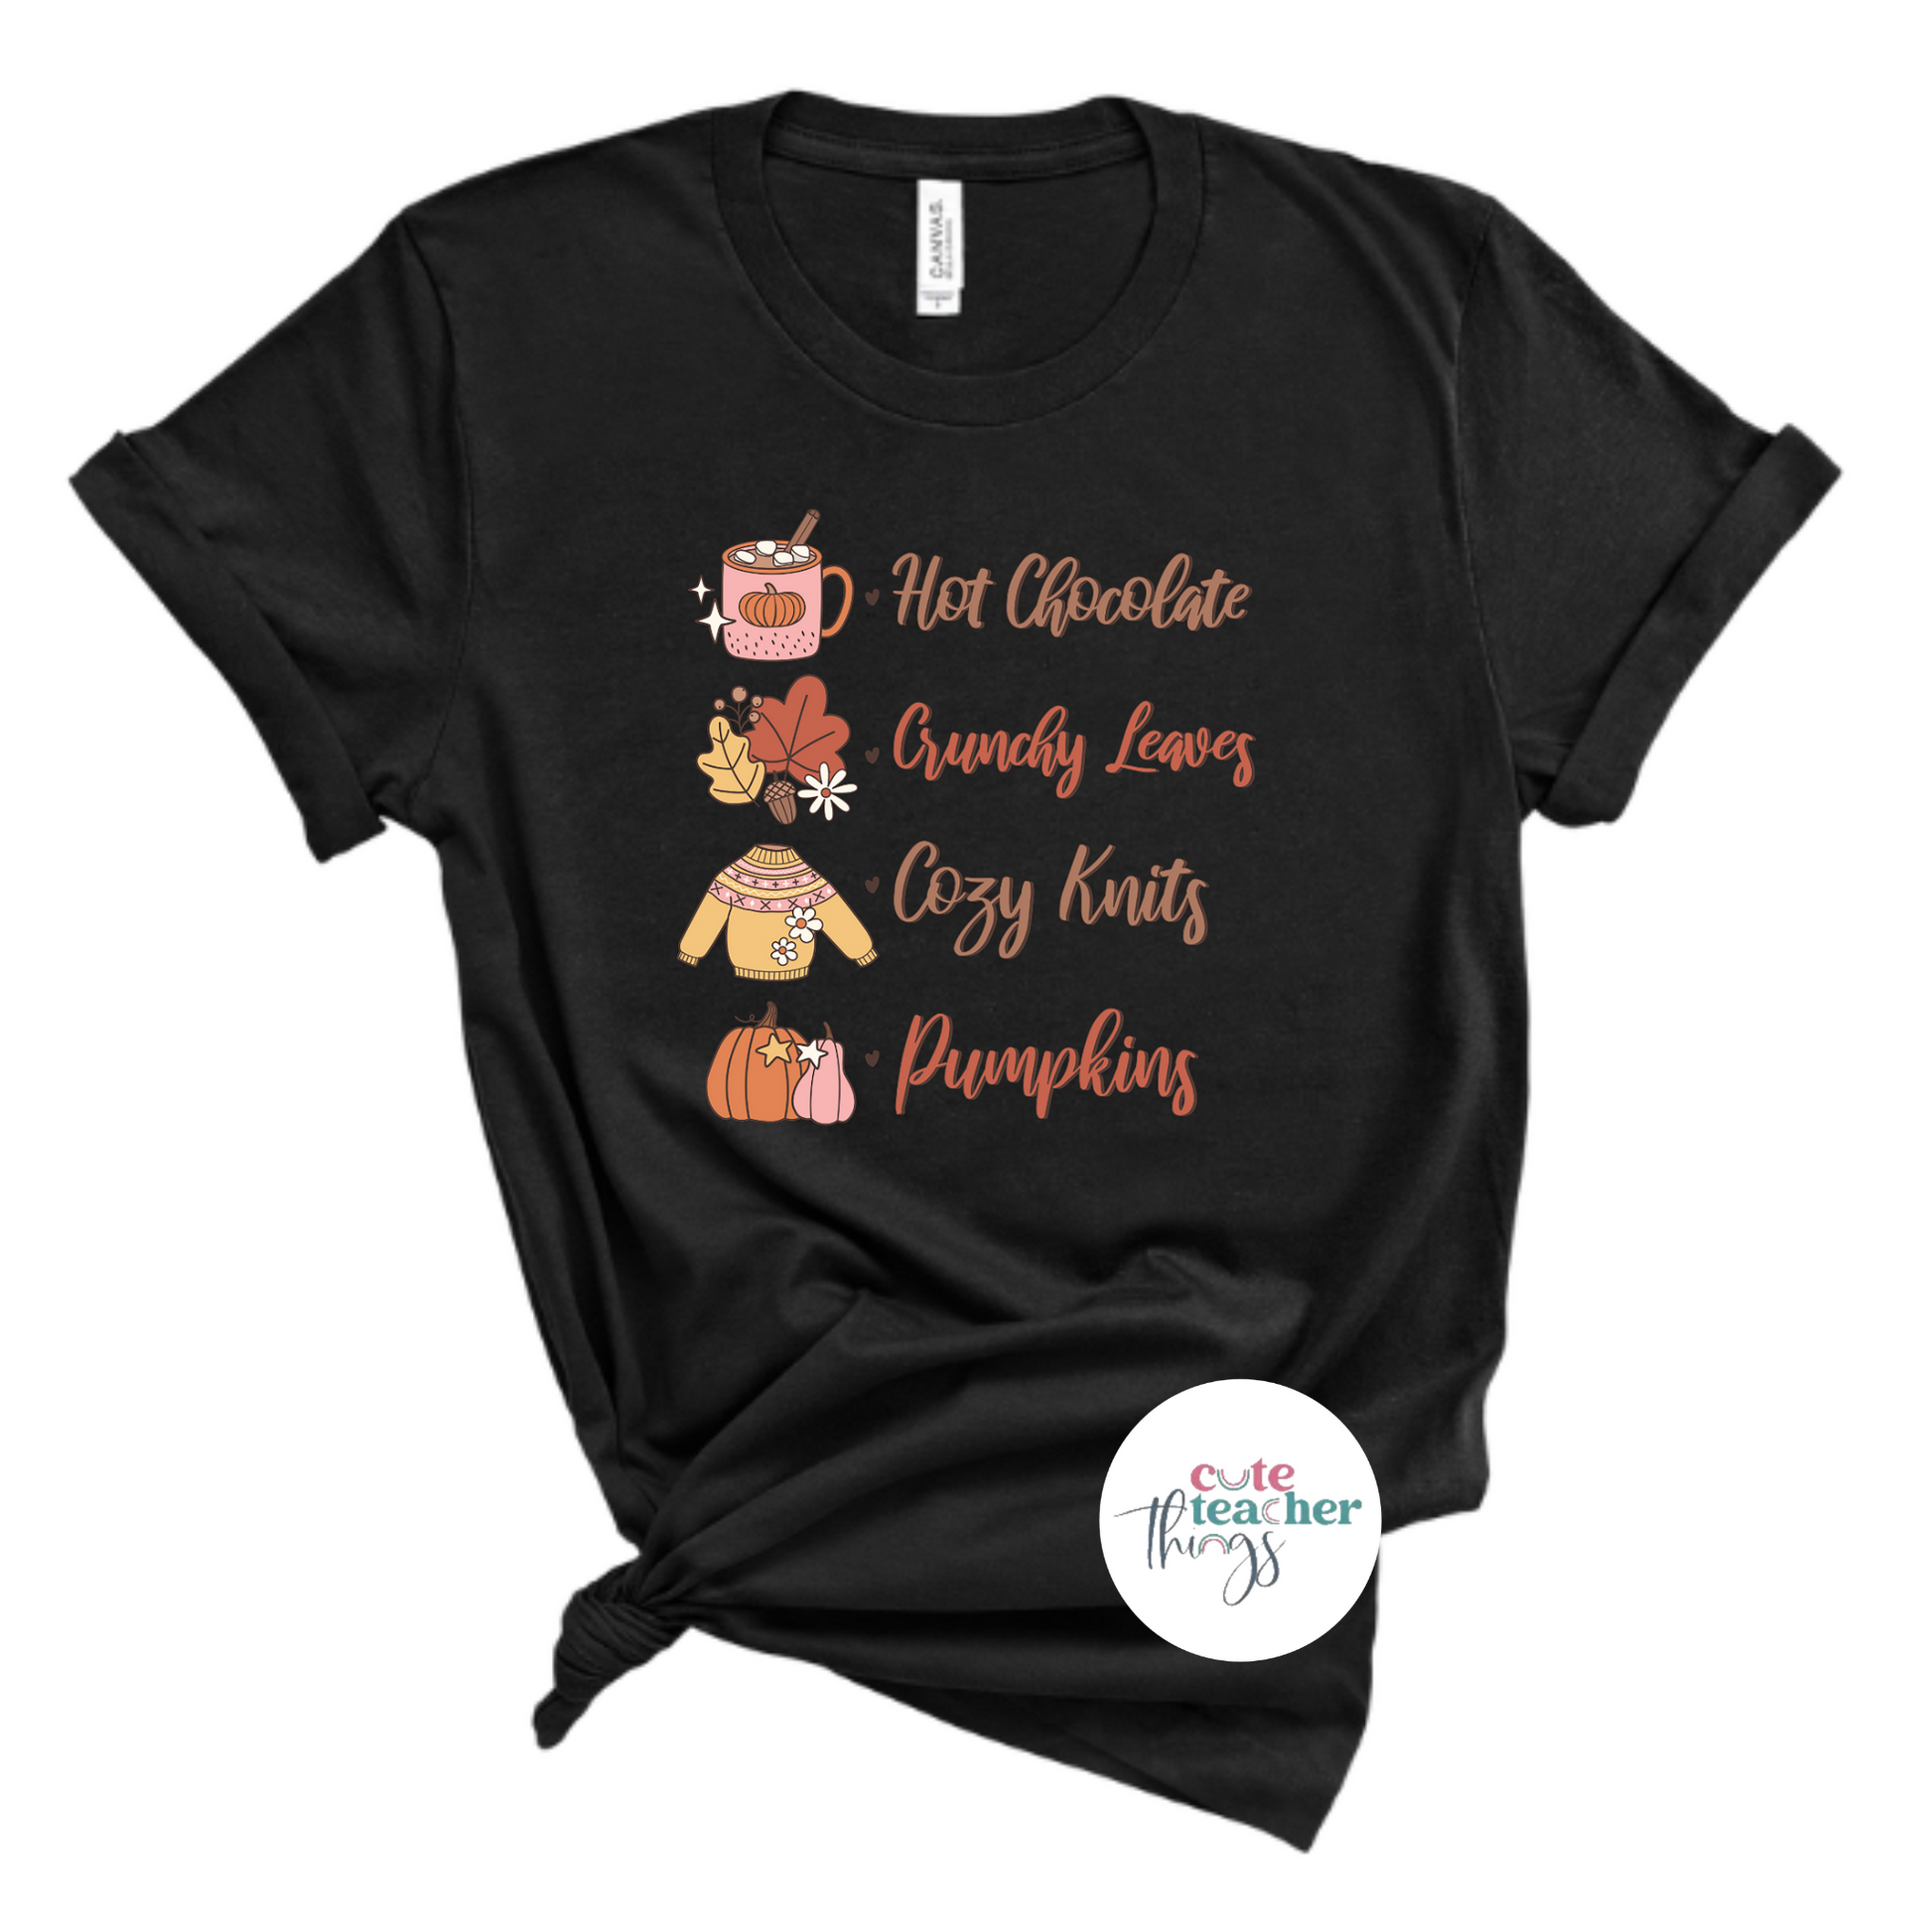 perfect gift for teachers, thanksgiving party, autumn vibes shirt